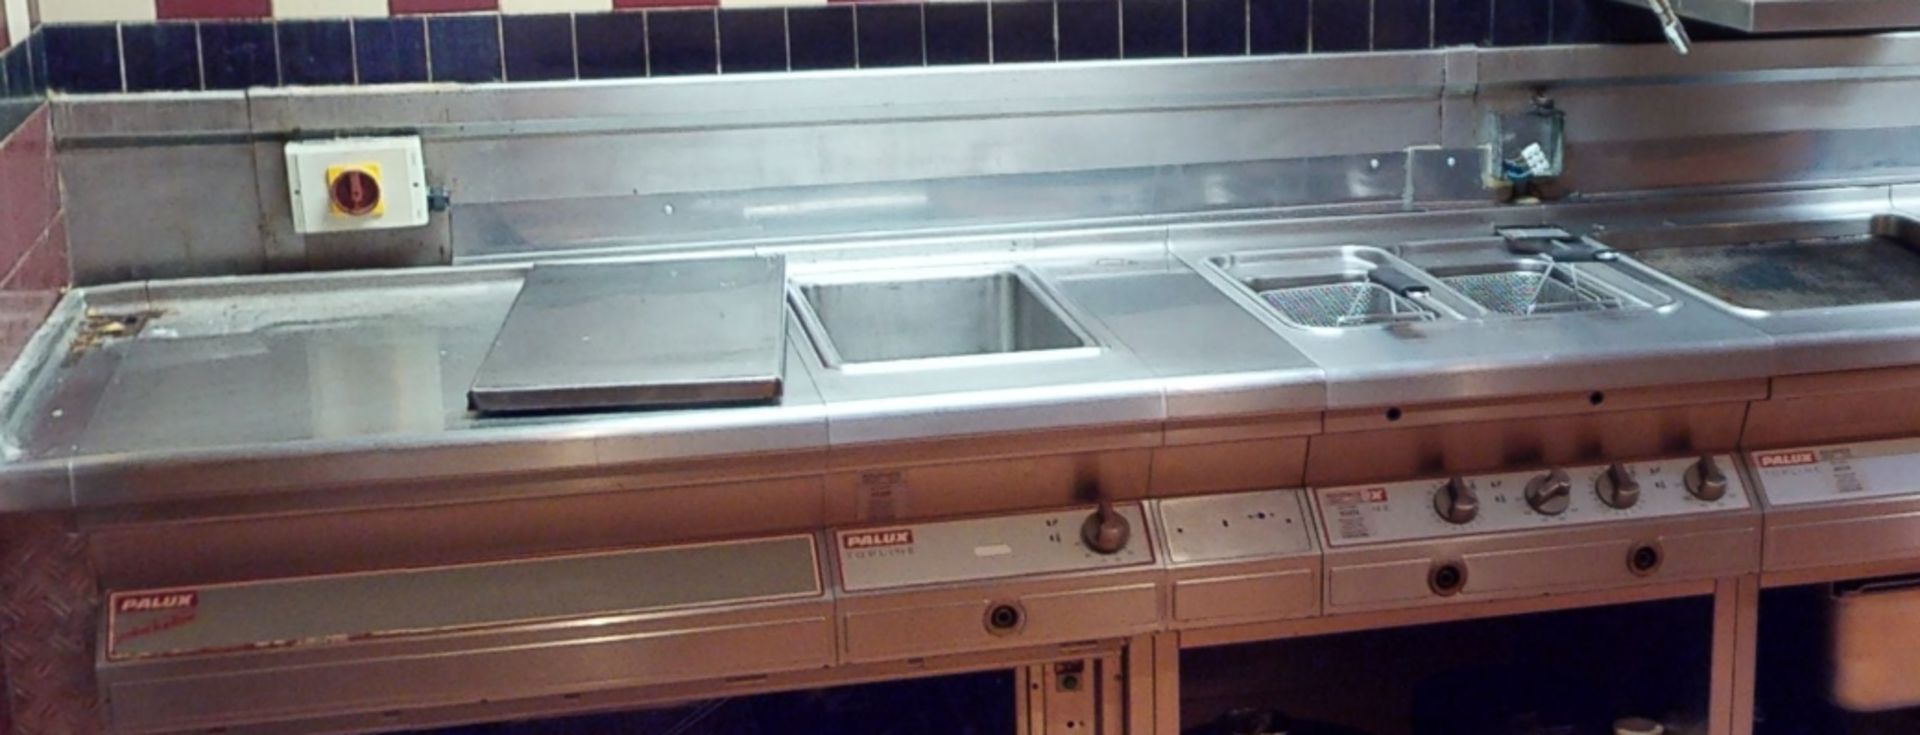 1 x PALUX TOPLINE Cooking Station - Approx 8m Length - Includes 13 units - Gas and Electric Powered - Image 9 of 14